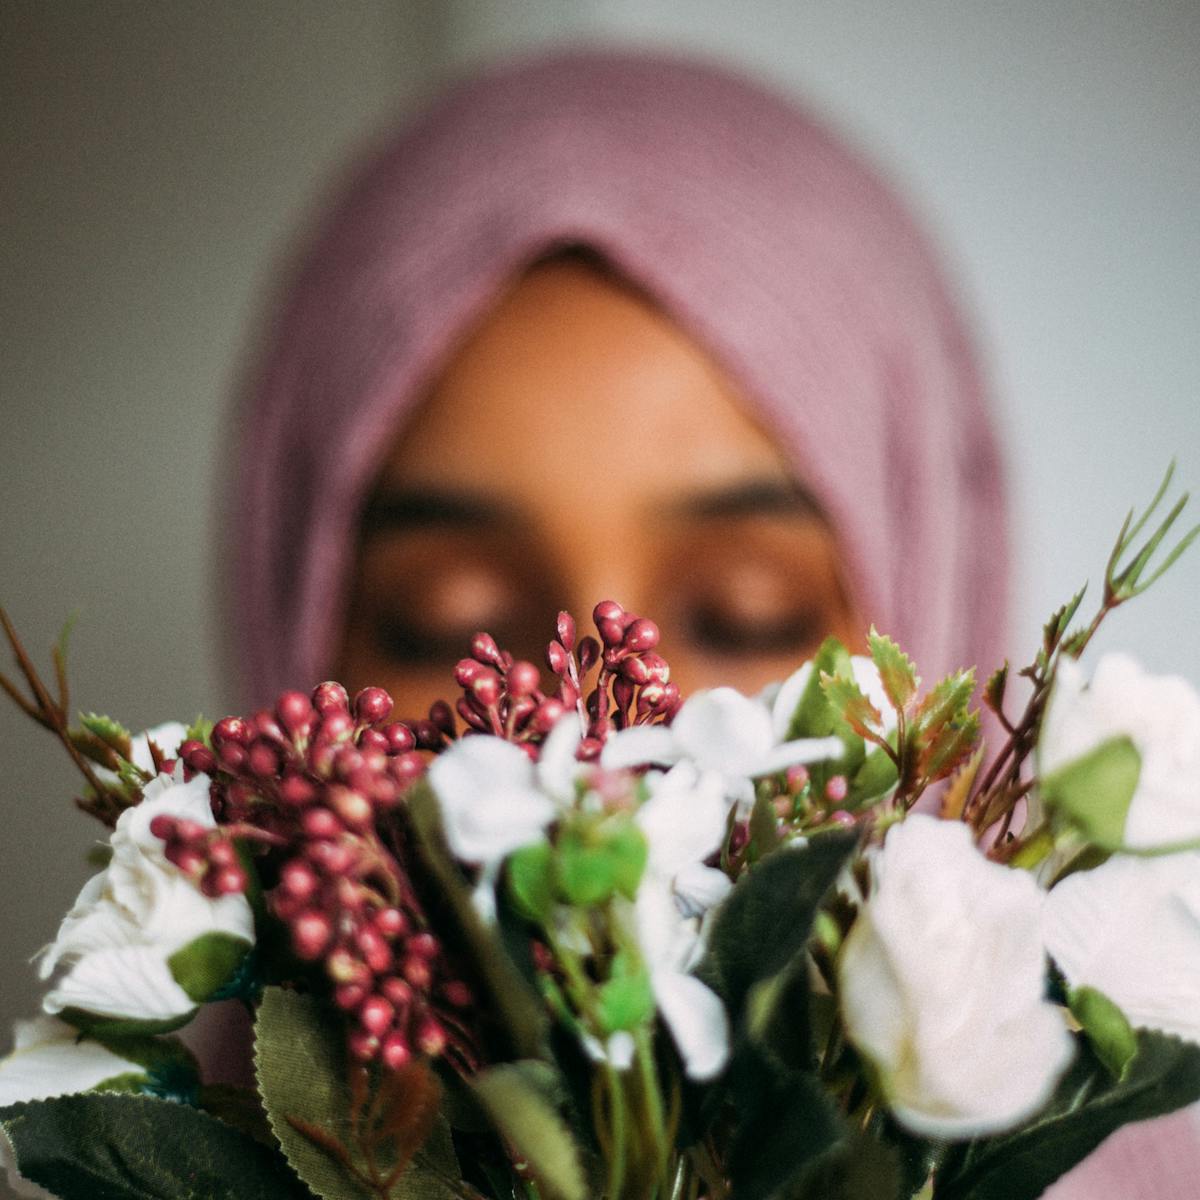 Photograph of a woman wearing a pink head scarf facing towards the camera. Her face is out of focus and partially obscured by a bunch of flowers.